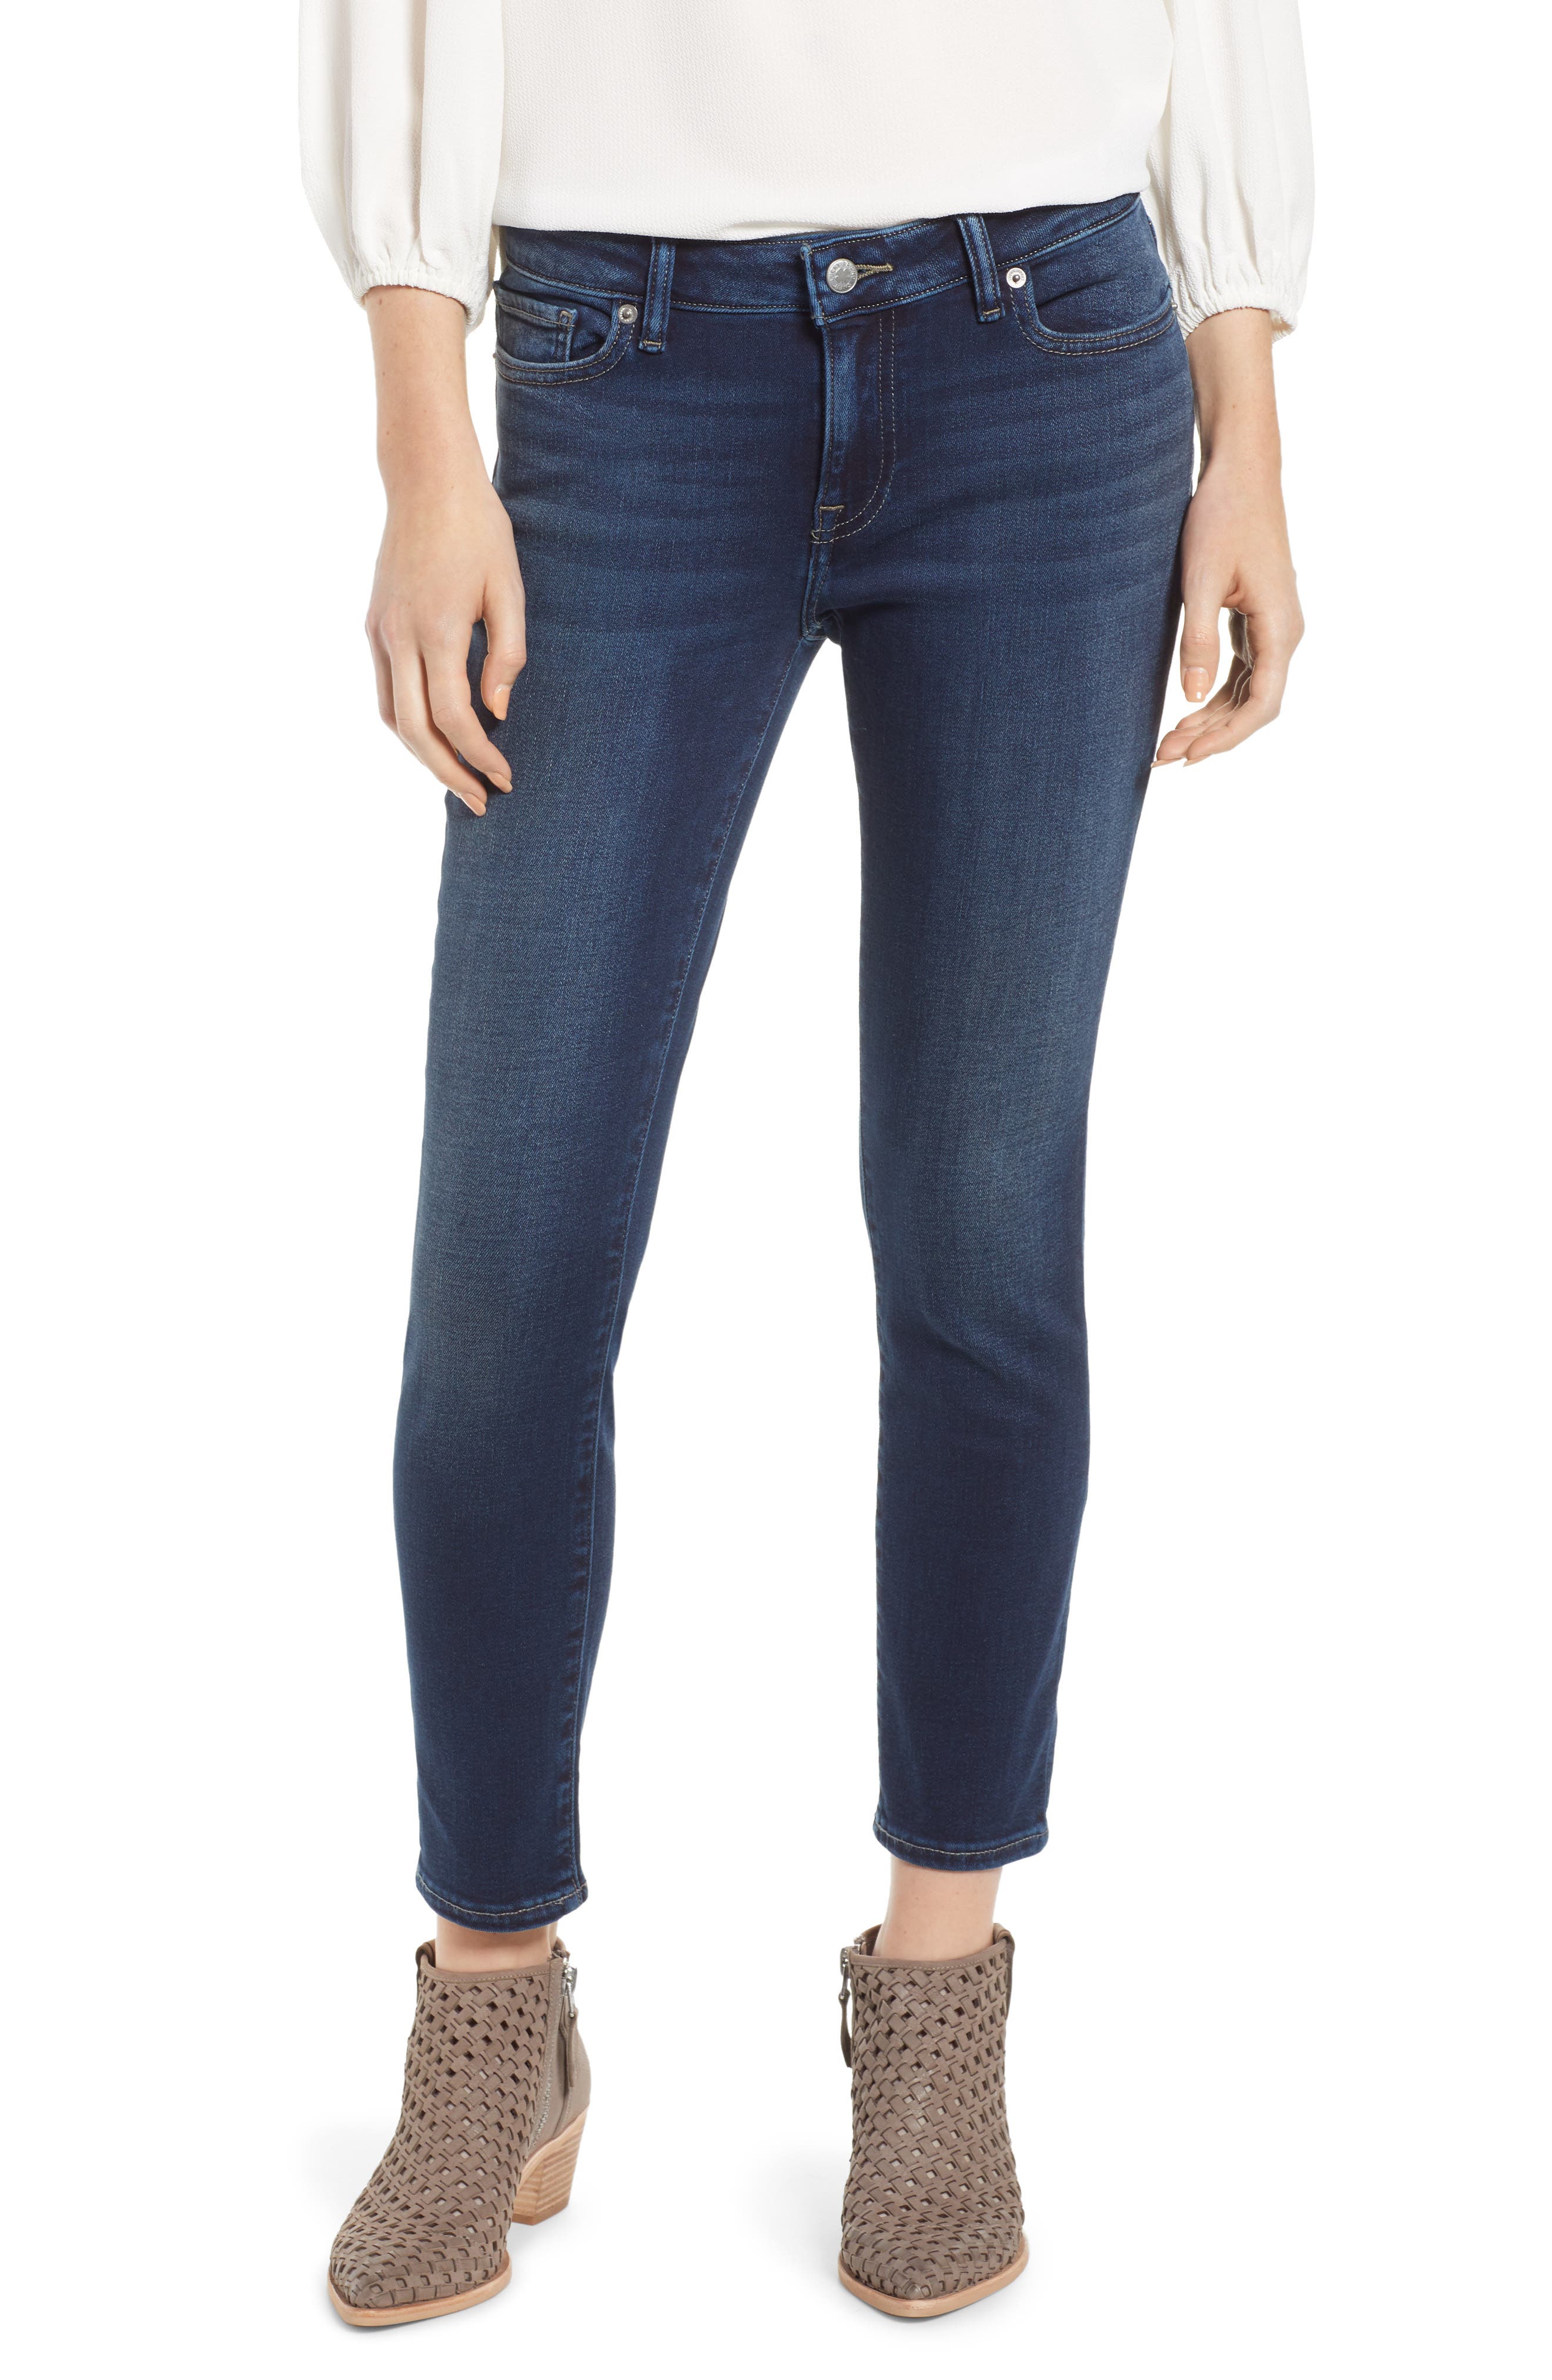 nordstrom lucky brand jeans